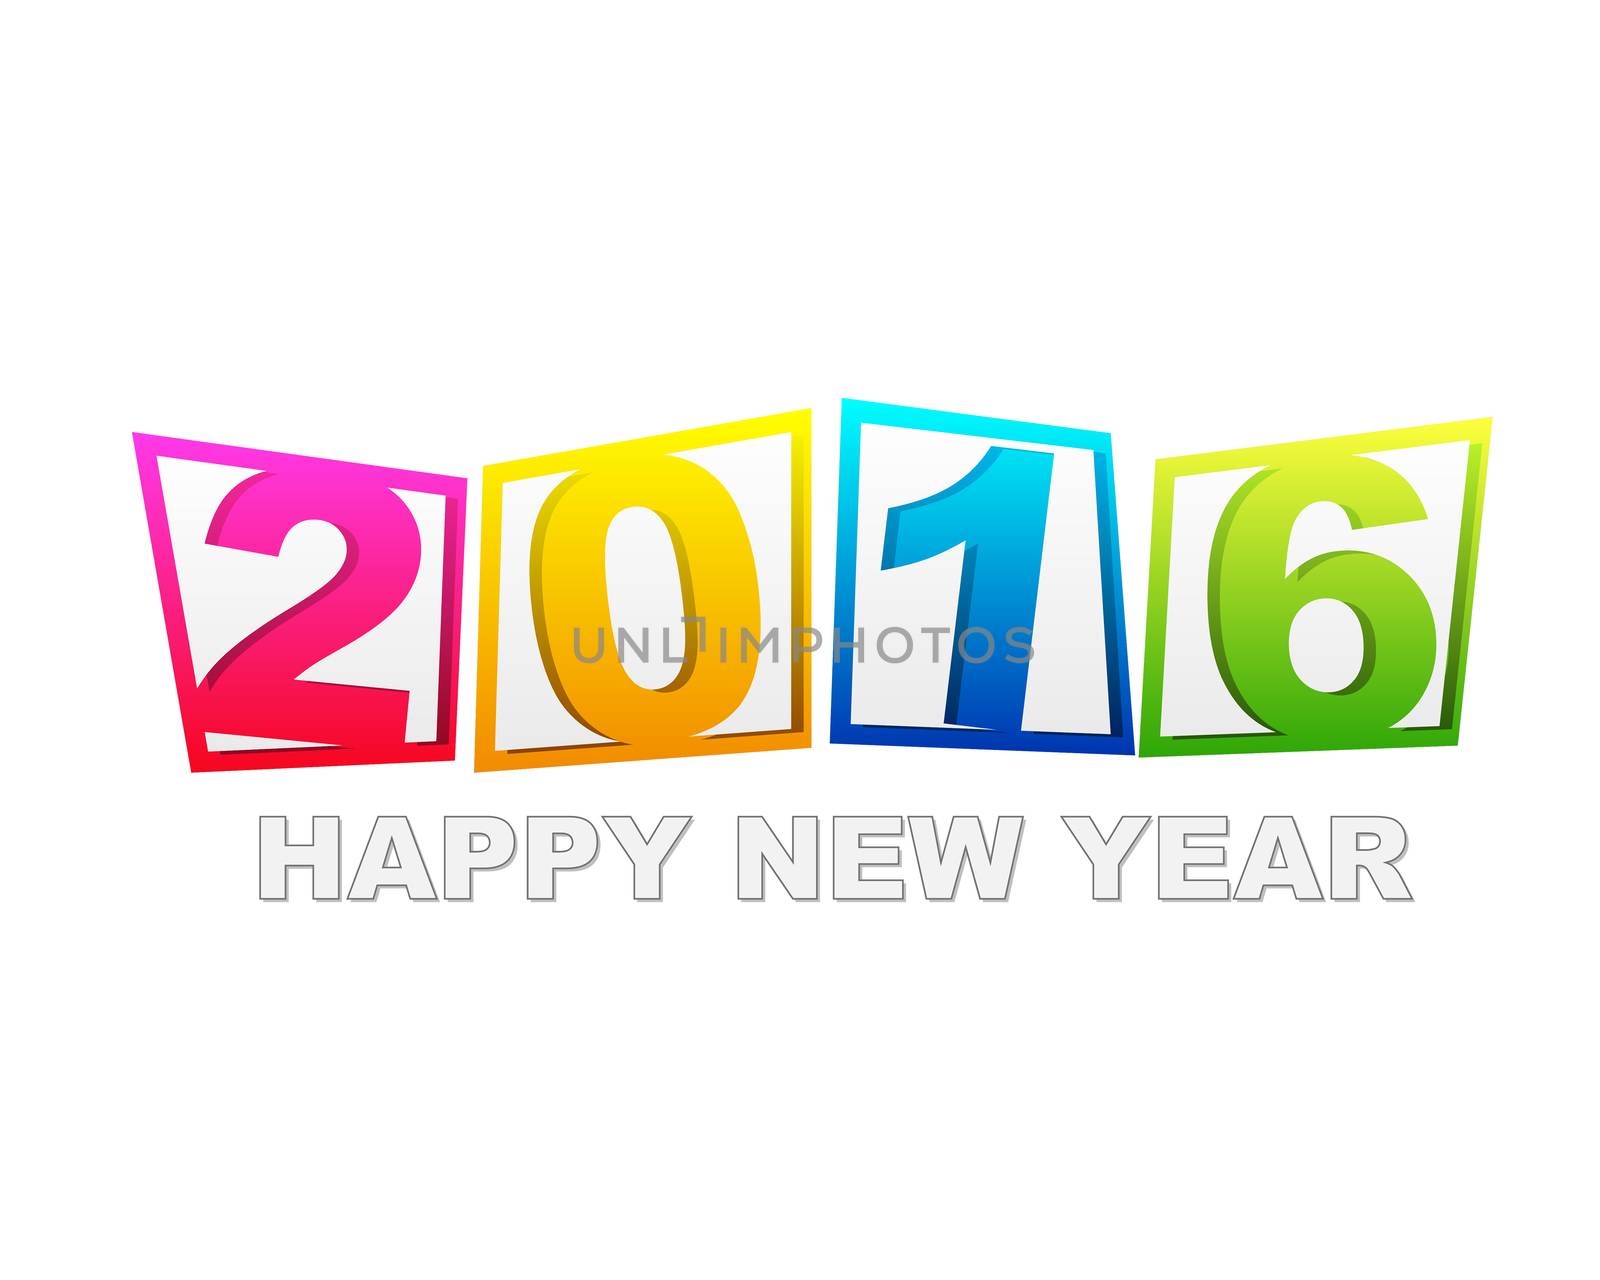 happy new year 2016 in flat colored tablets by marinini